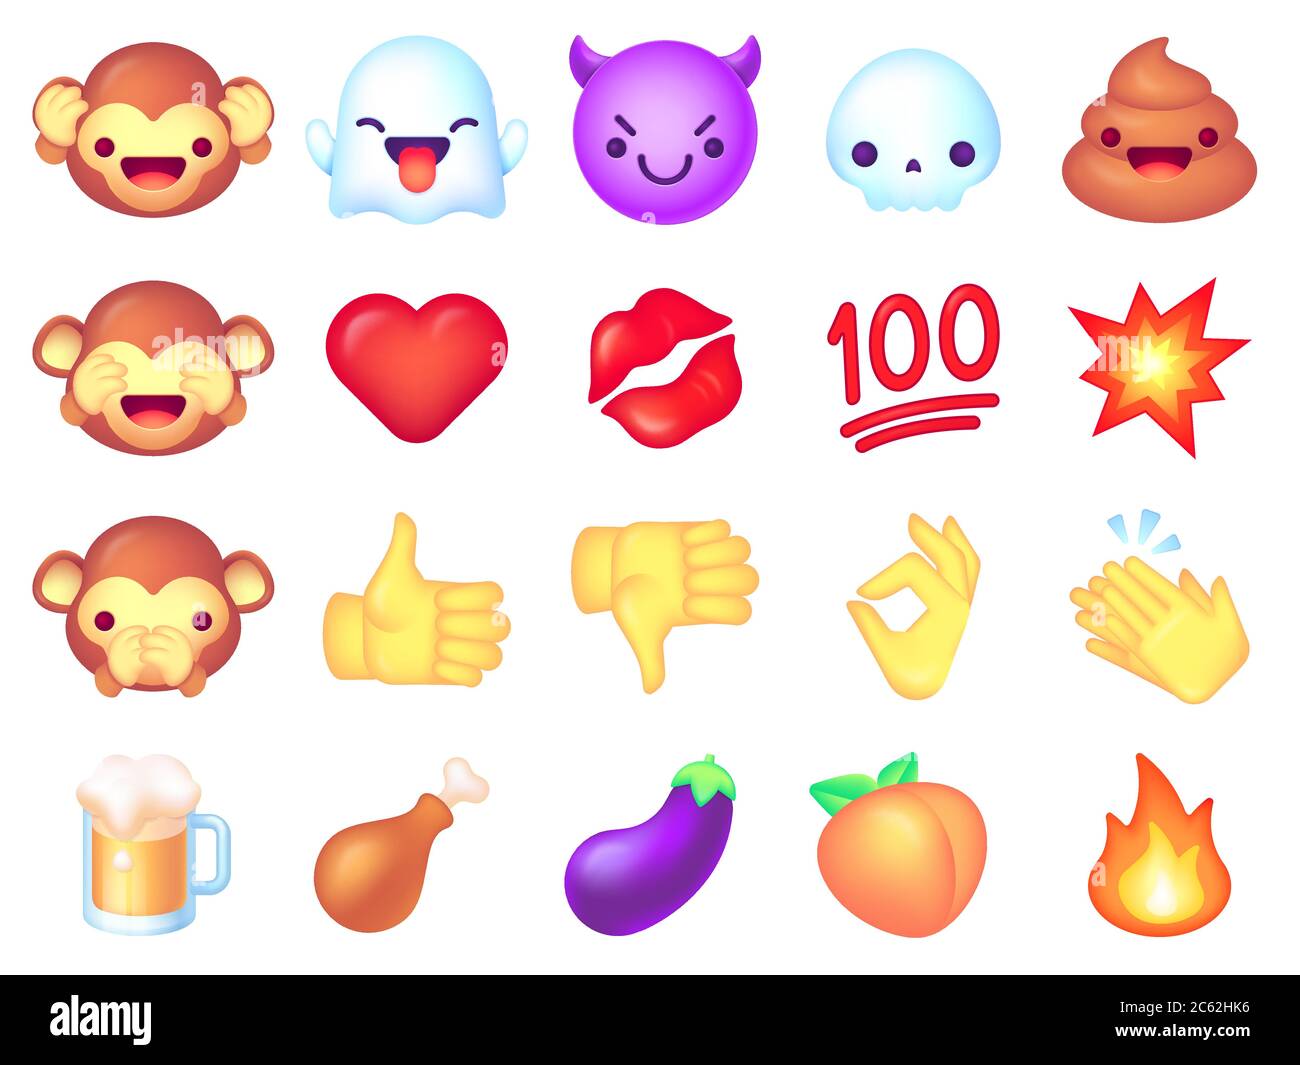 Emoji icons. Cute smiley, emoticons happy and angry face, comic turd. Eggplant, monkey collection, hand and kiss lips social chat vector set Stock Vector